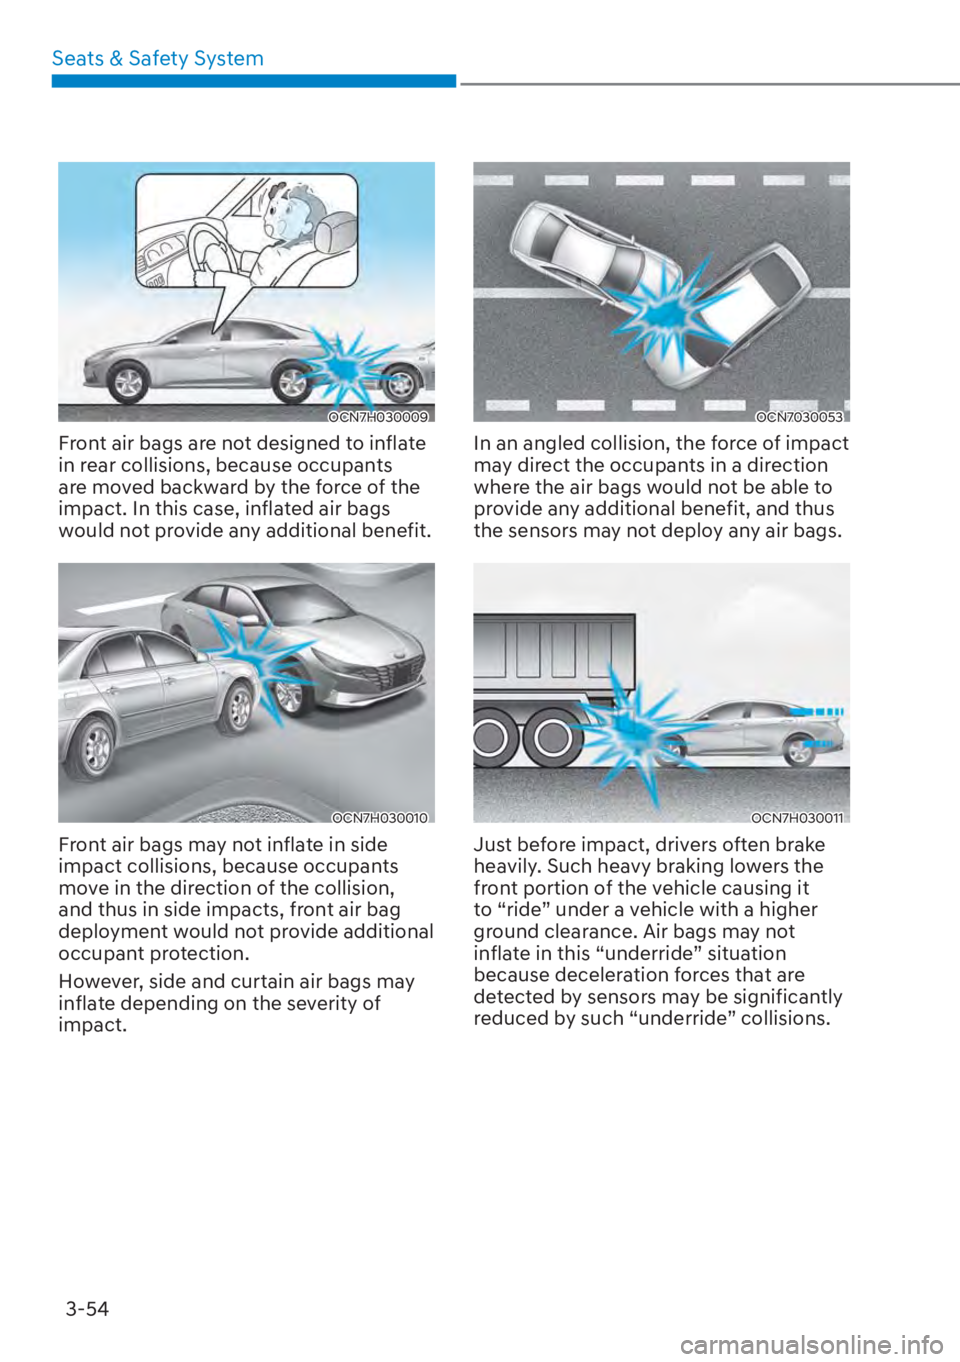 HYUNDAI ELANTRA HYBRID 2023  Owners Manual Seats & Safety System3-54
OCN7H030009
Front air bags are not designed to inflate 
in rear collisions, because occupants 
are moved backward by the force of the 
impact. In this case, inflated air bags